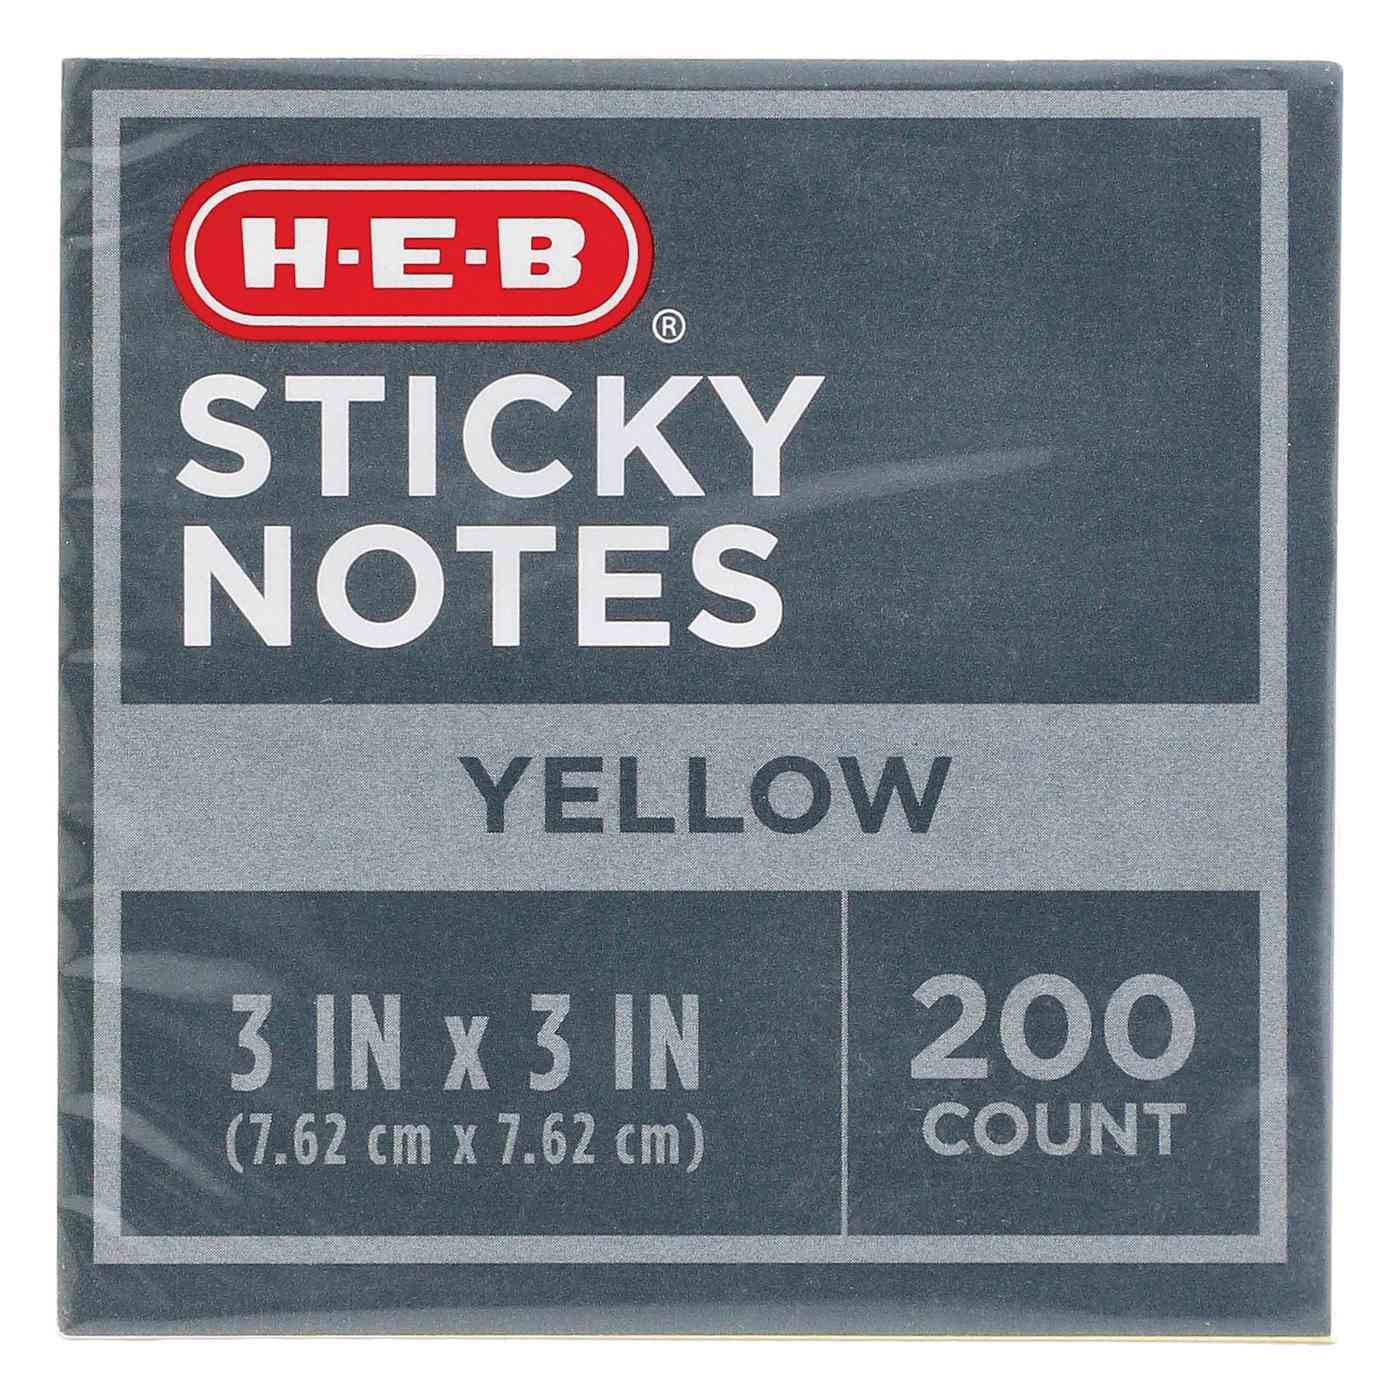 H-E-B 200 Sticky Notes - Yellow; image 2 of 2